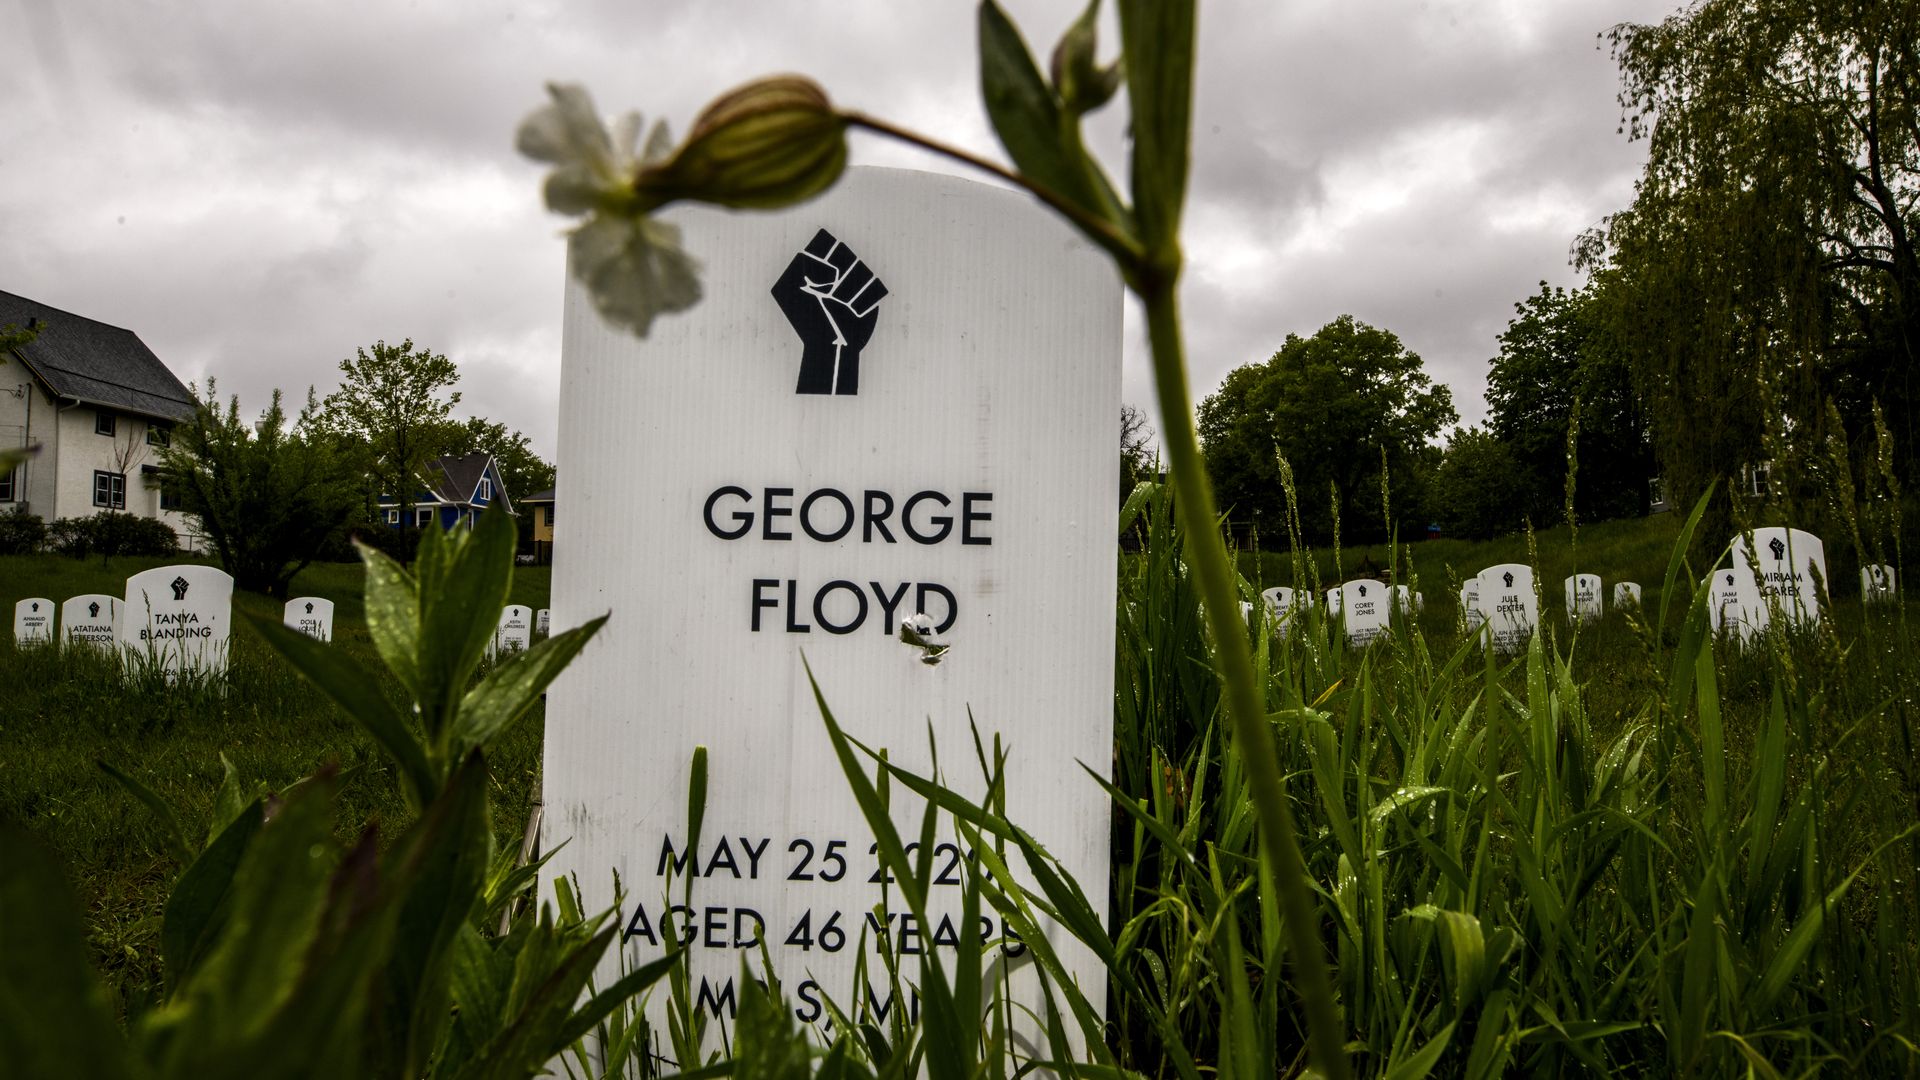 Photo of a white gravestone with George Floyd's name and the image of a fist engraved on it